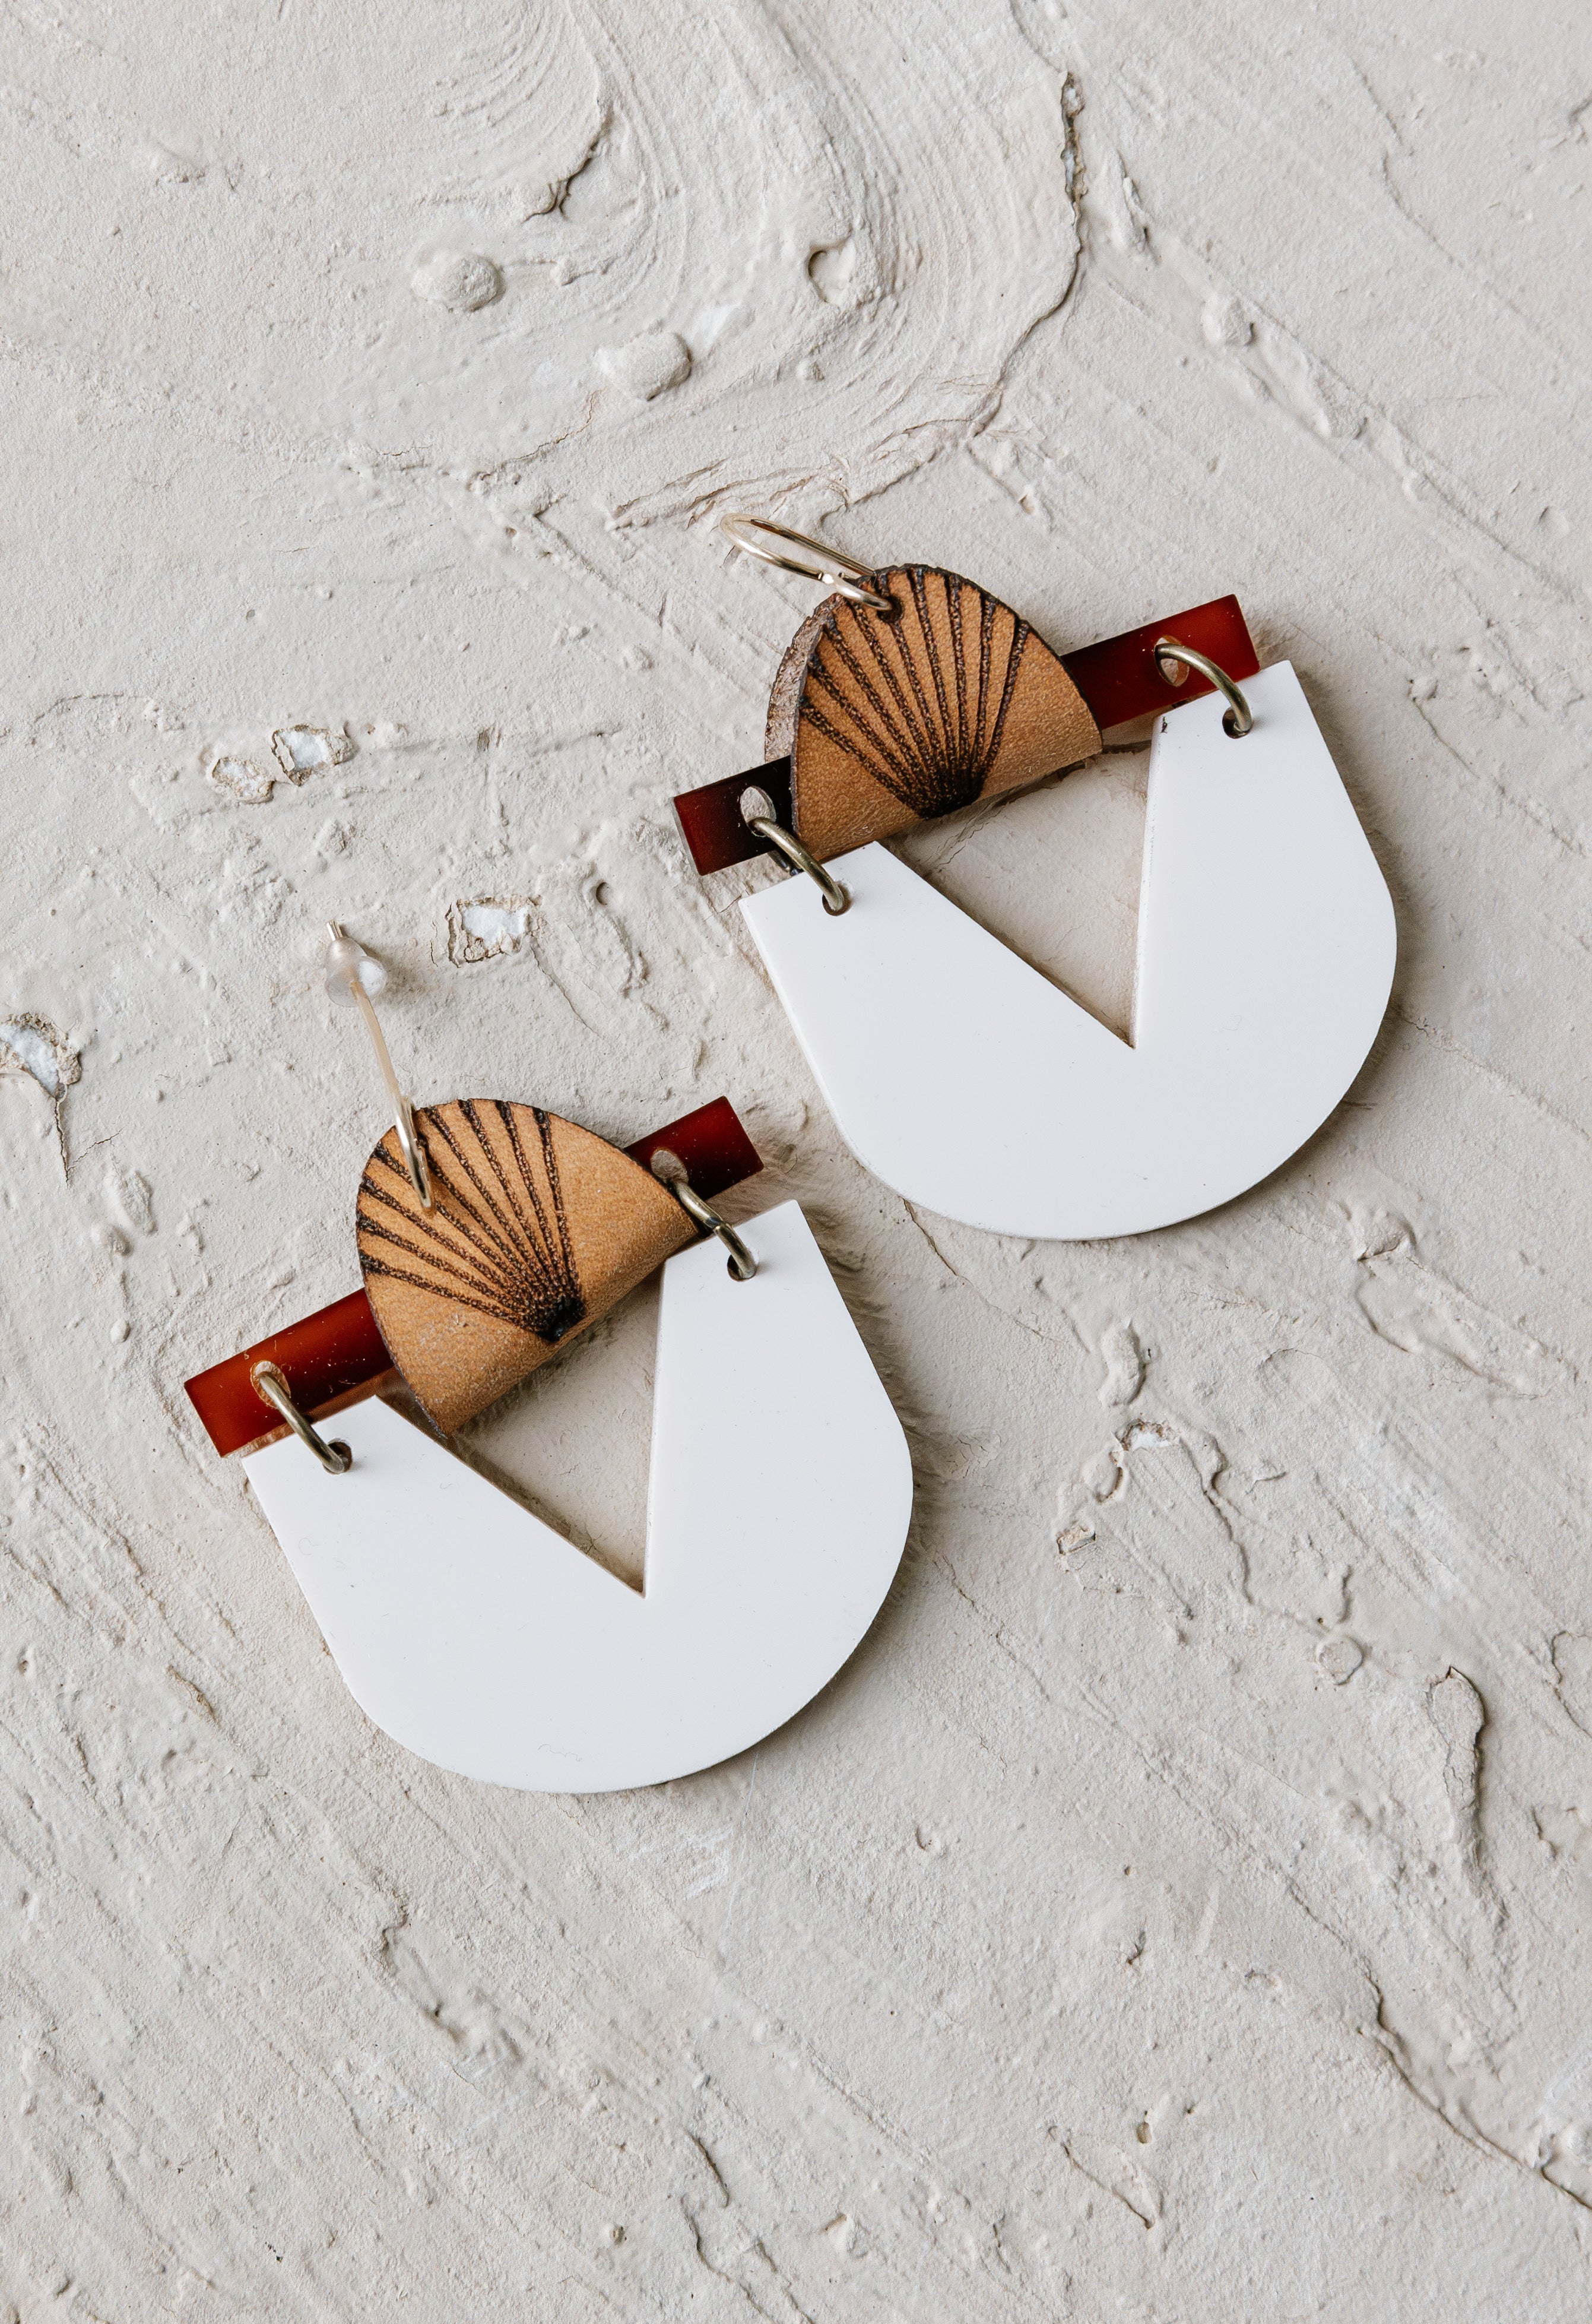 Puget Sound Earrings - WHITE - willows clothing Earrings